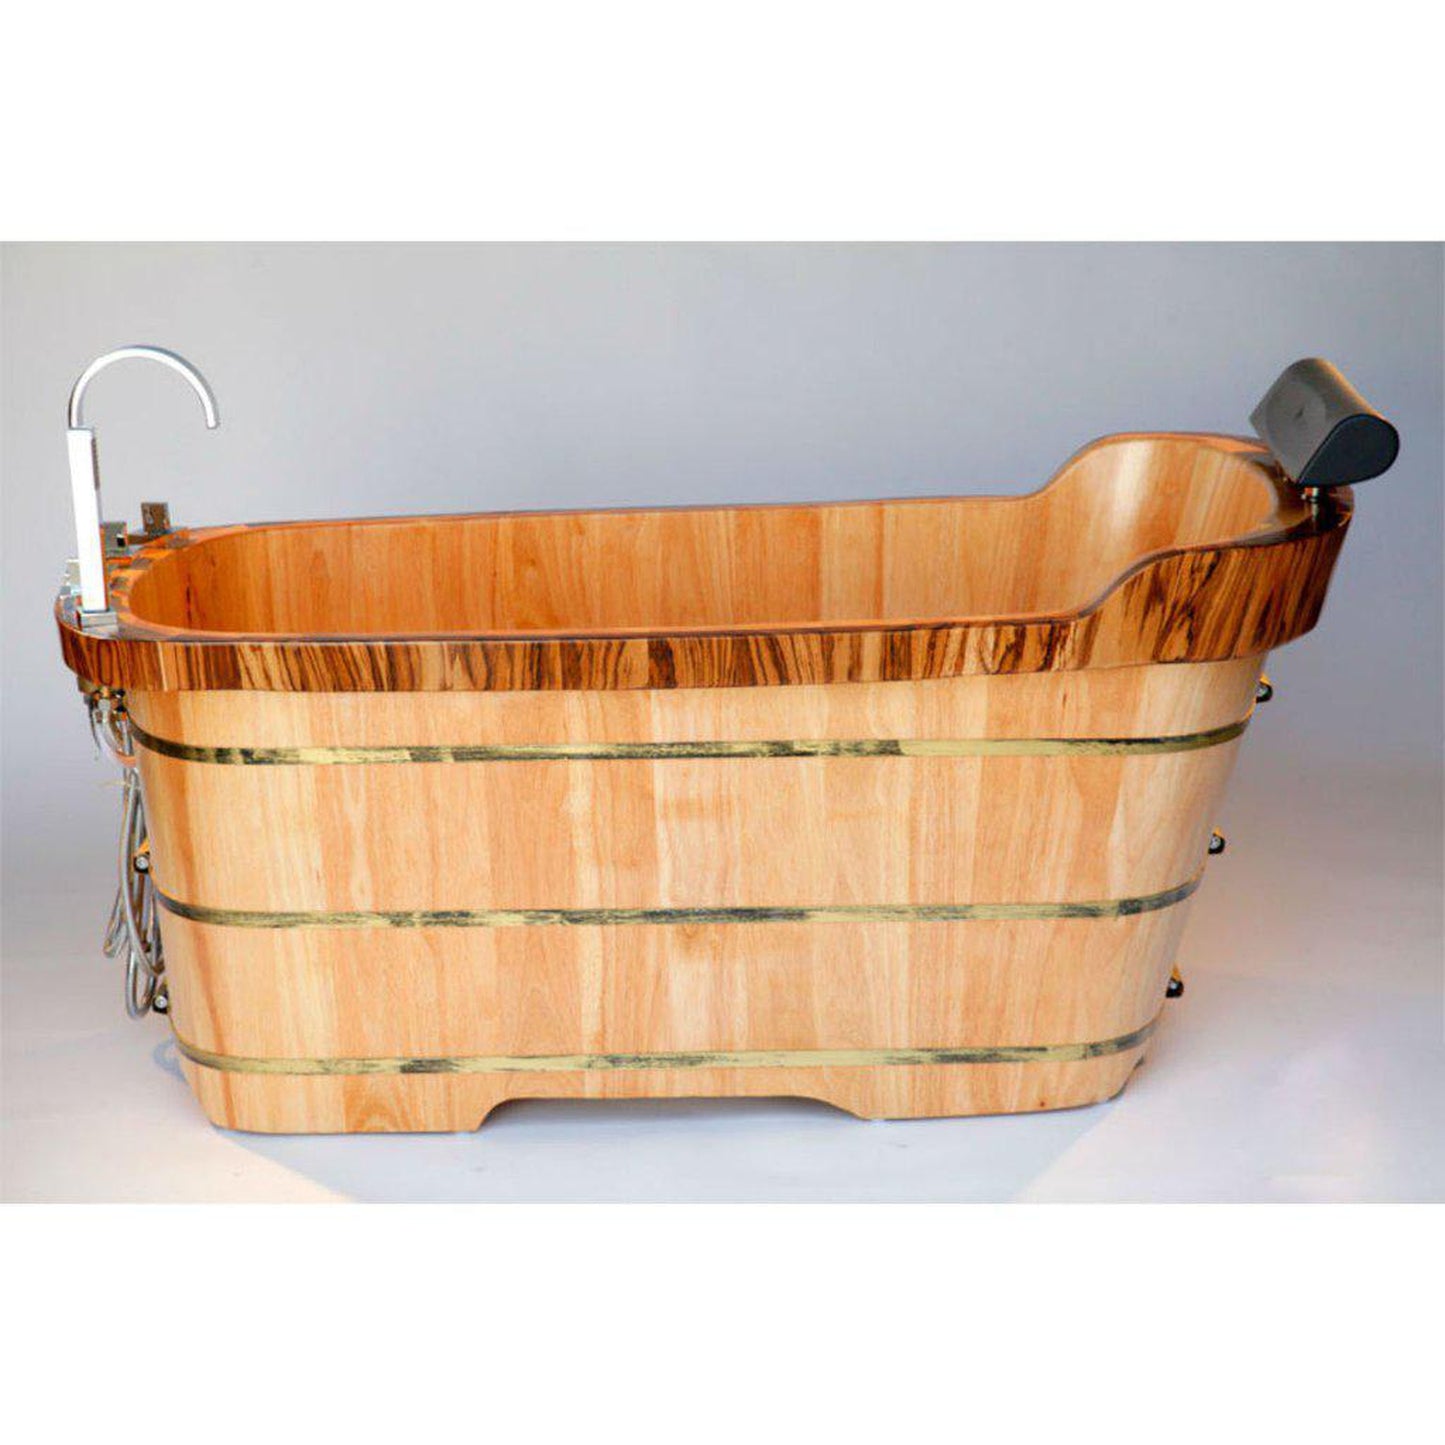 ALFI Brand AB1148 59" One Person Freestanding Wooden Bathtub With Chrome Tub Filler